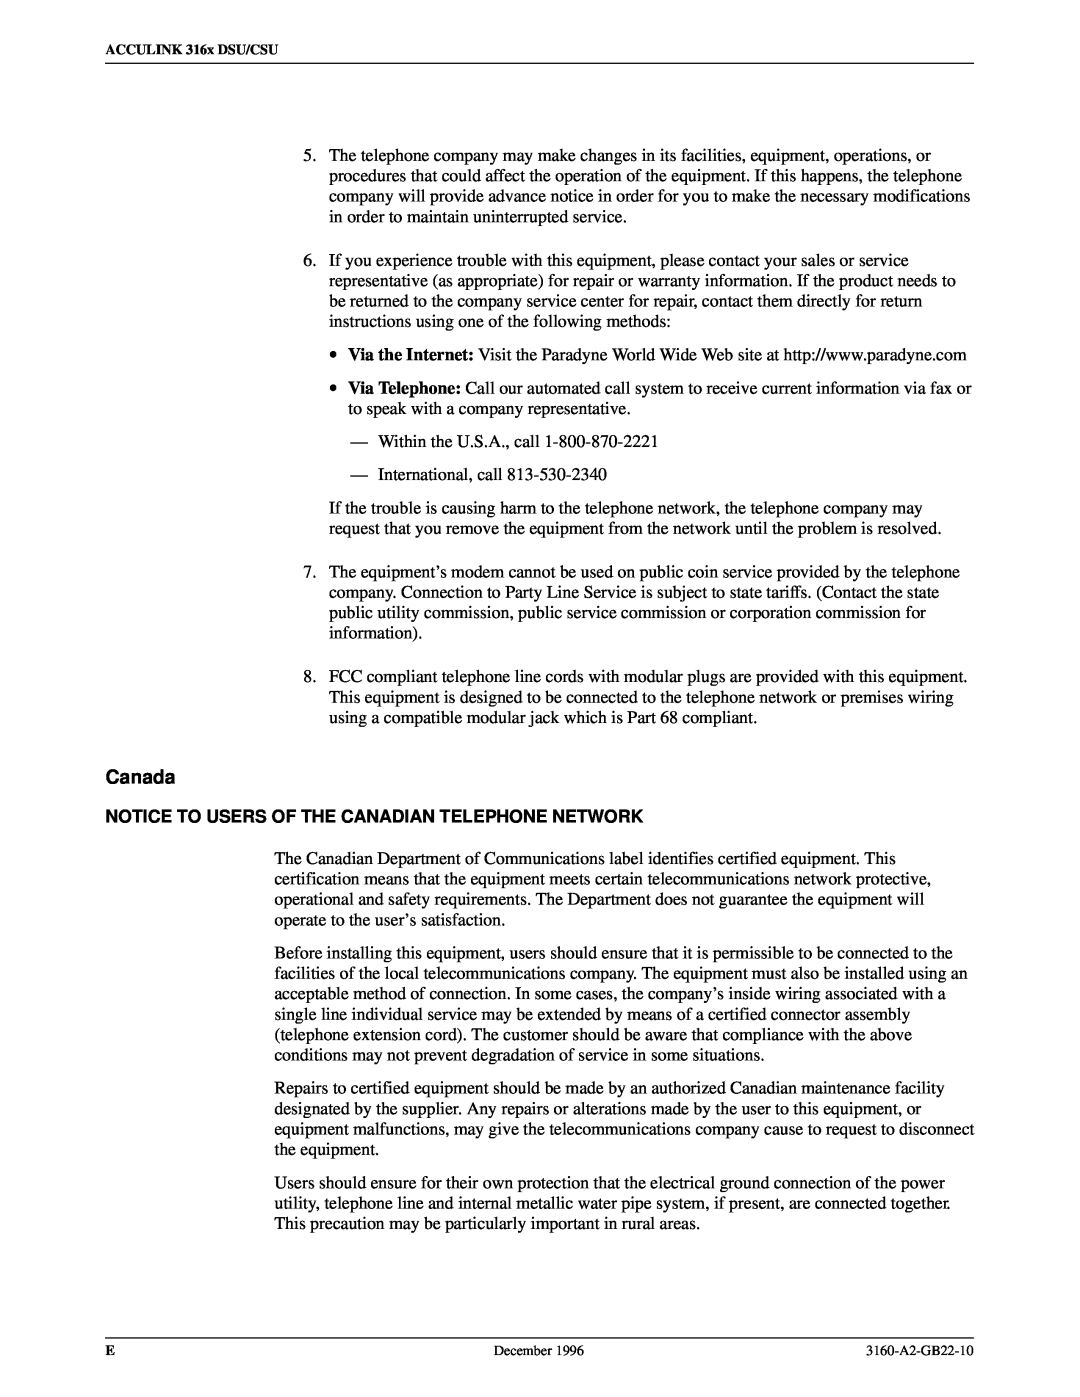 Paradyne 316x manual Canada, Notice To Users Of The Canadian Telephone Network 